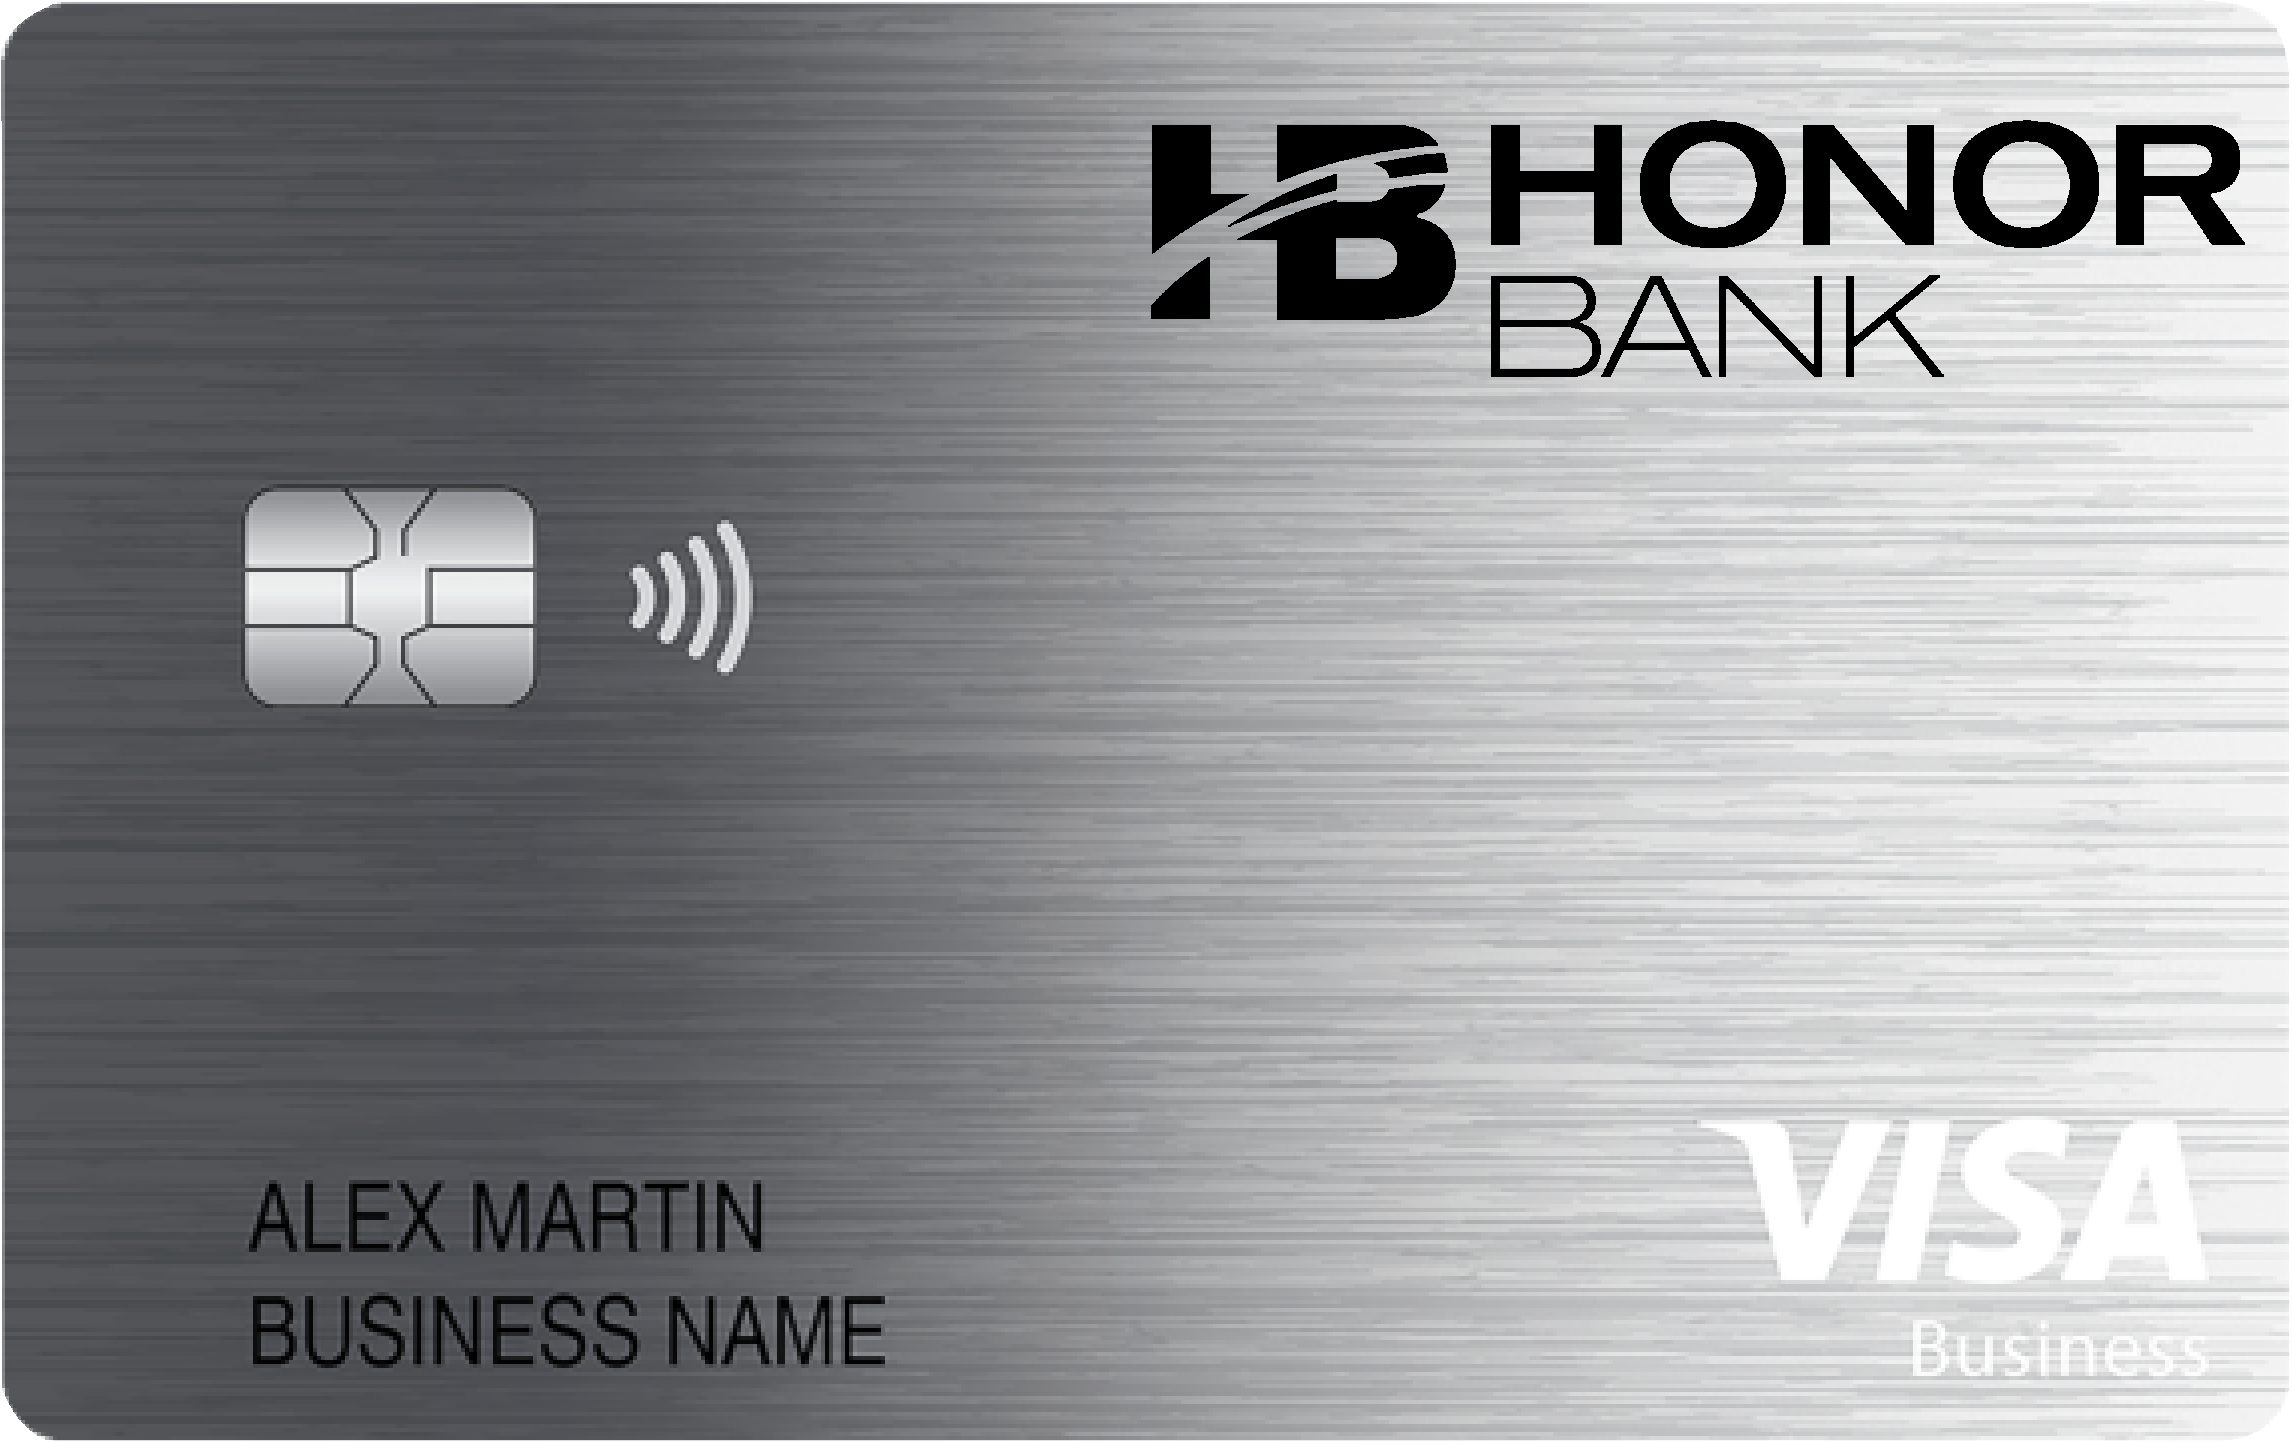 Honor Bank Business Cash Preferred Card